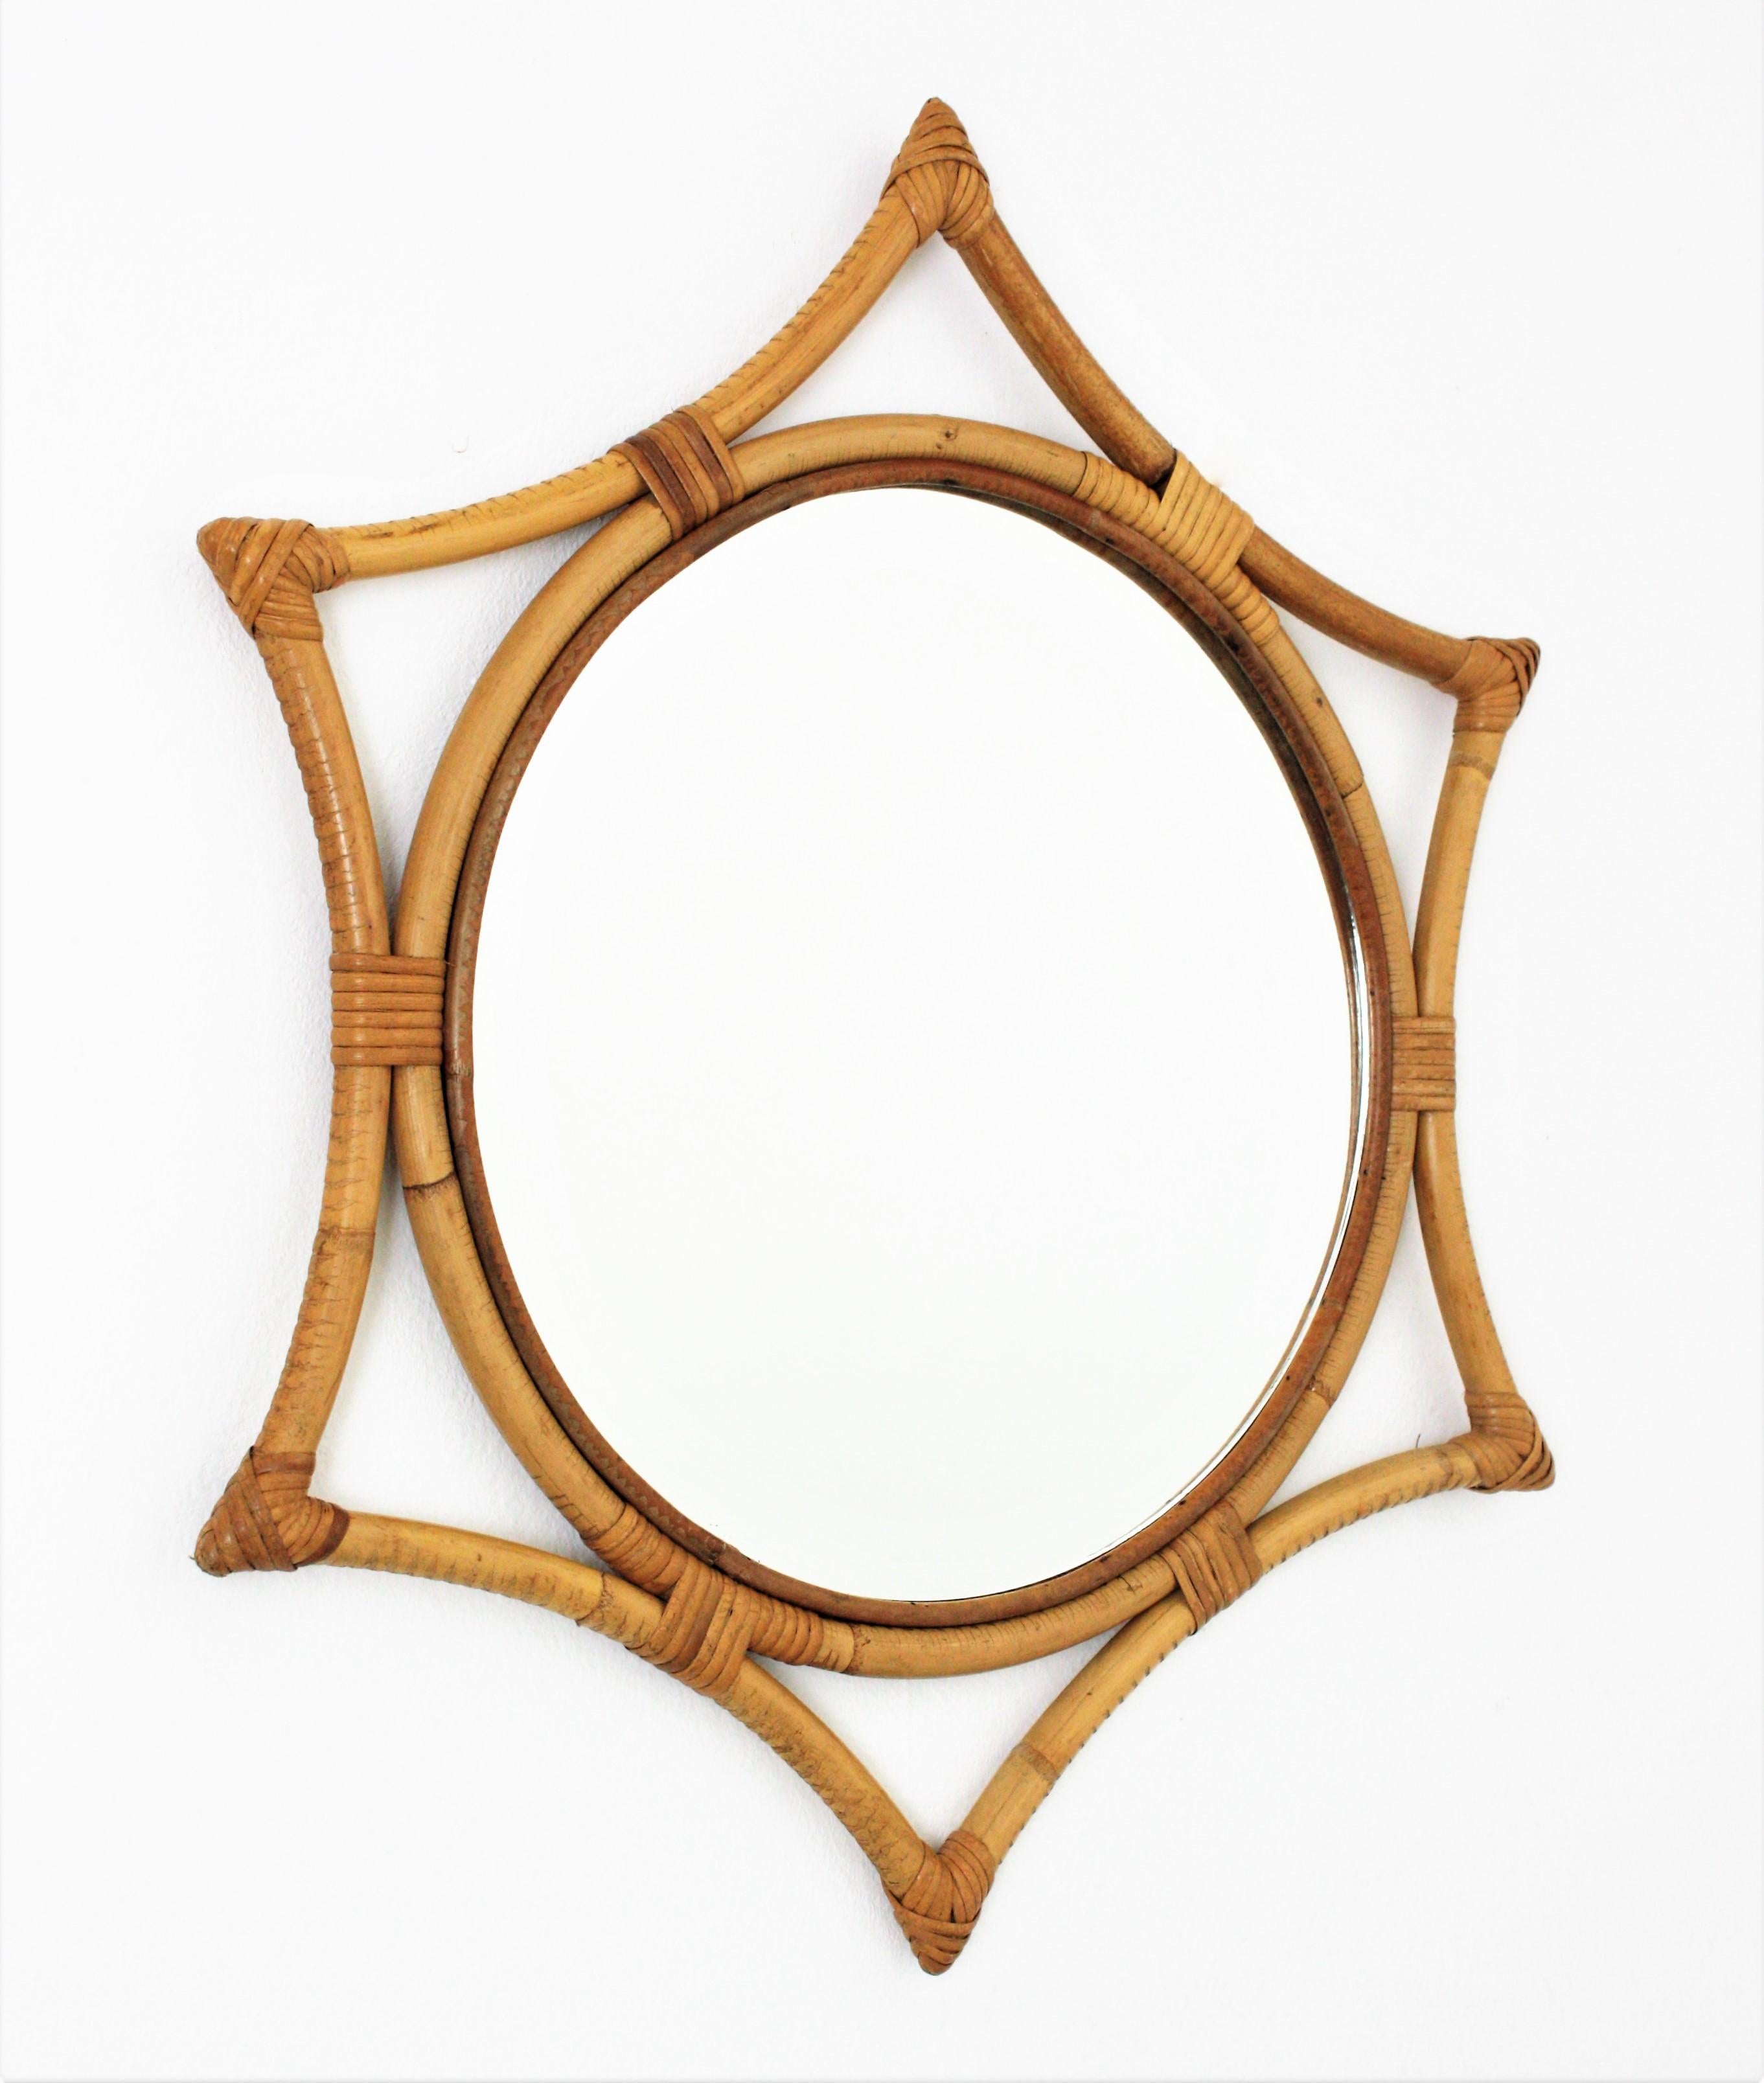 Midcentury bamboo rattan sunburst starburst mirror. Spain, 1960s.
This wall mirror features a round mirror glass framed by a bamboo star shaped frame with wicker /rattan accents.
Beautiful placed alone but also interesting as a part of a wall